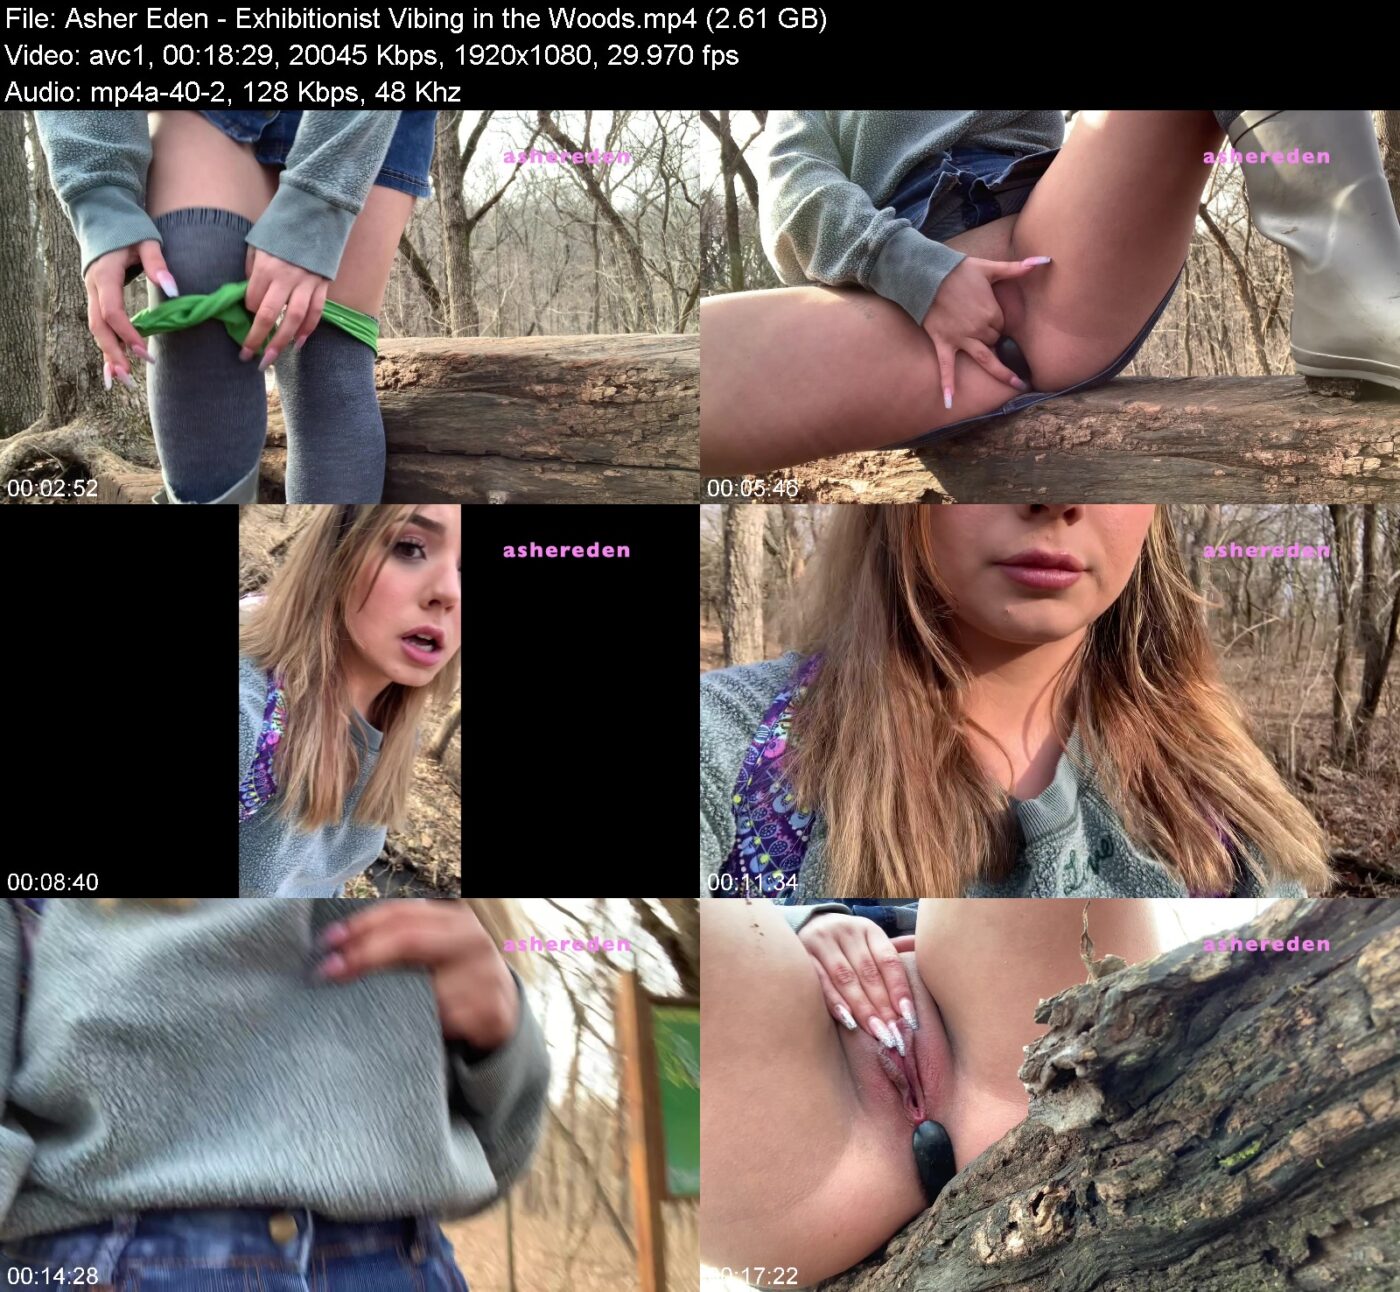 Actress: Asher Eden. Title and Studio: Exhibitionist Vibing in the Woods